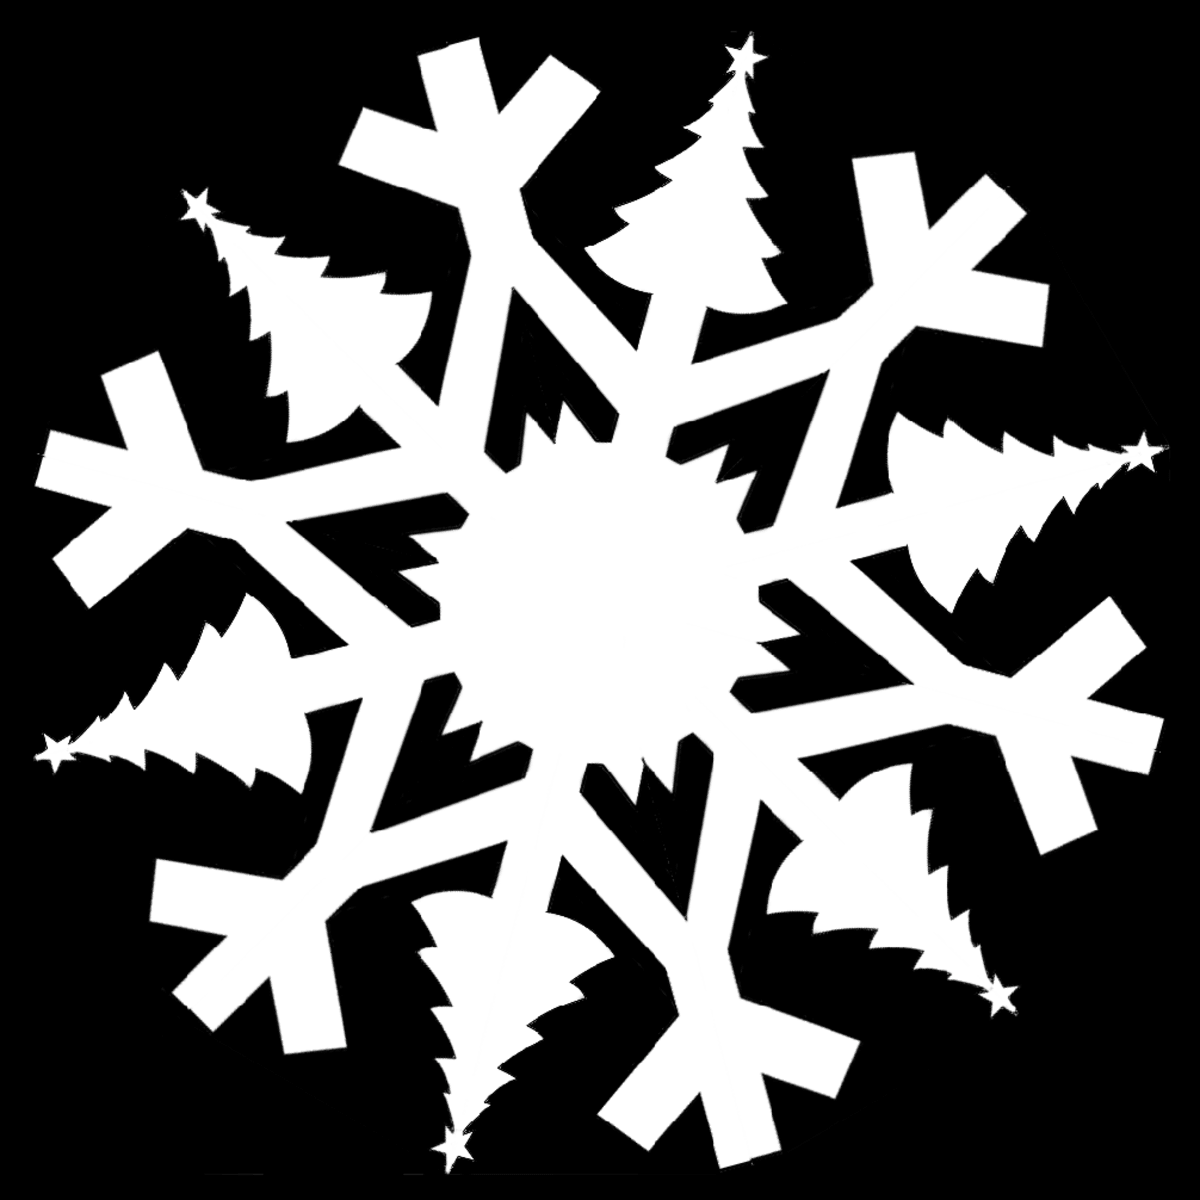 Christmas Snowflake Template Snowflake Templates Printable Stencils And Patterns Patterns